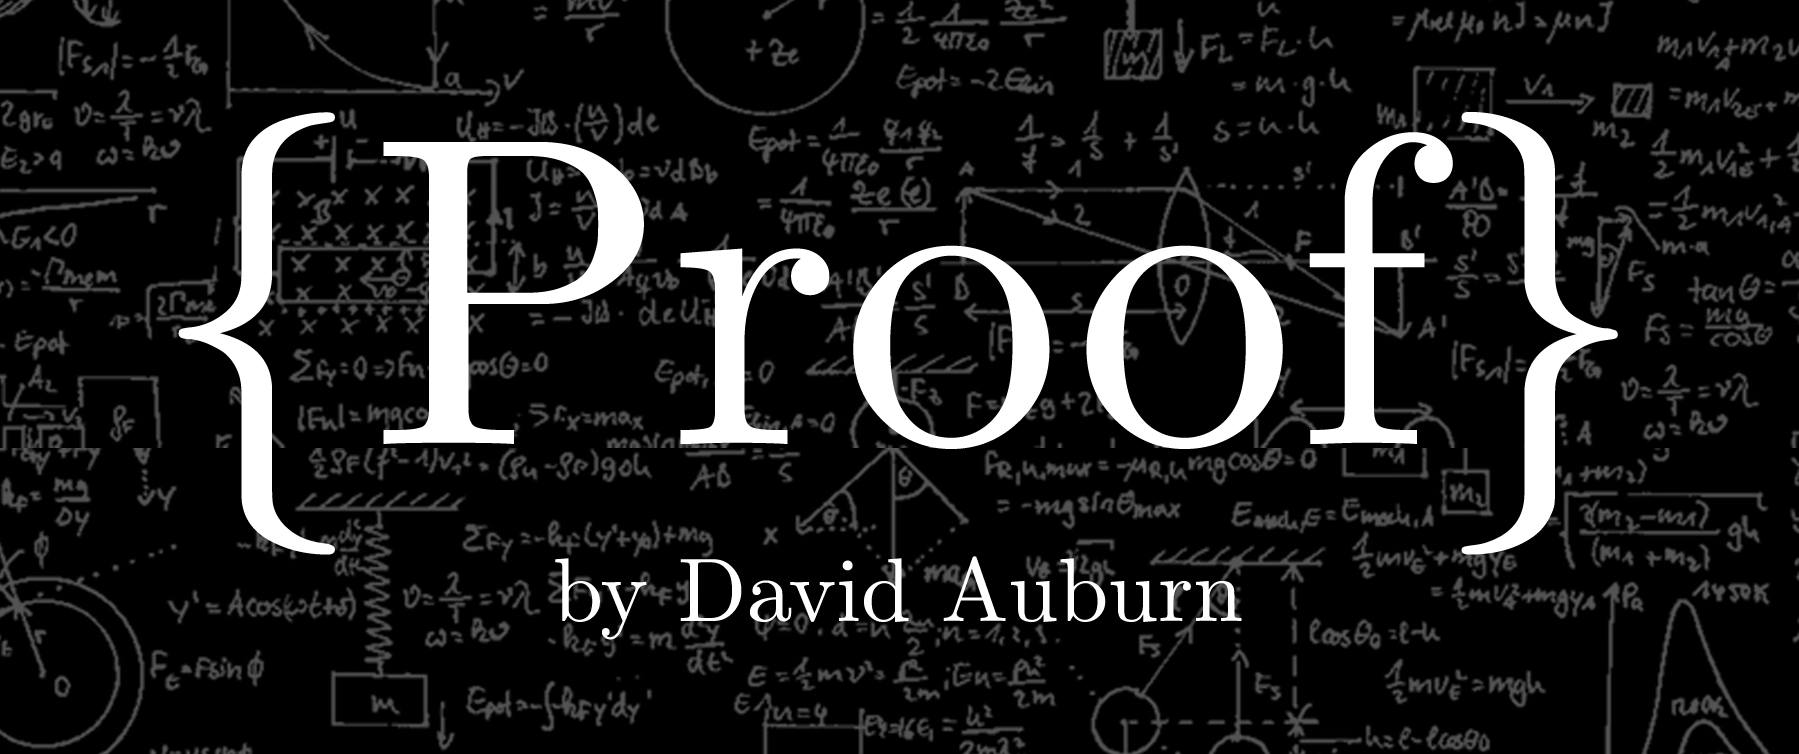 Auditions for Proof